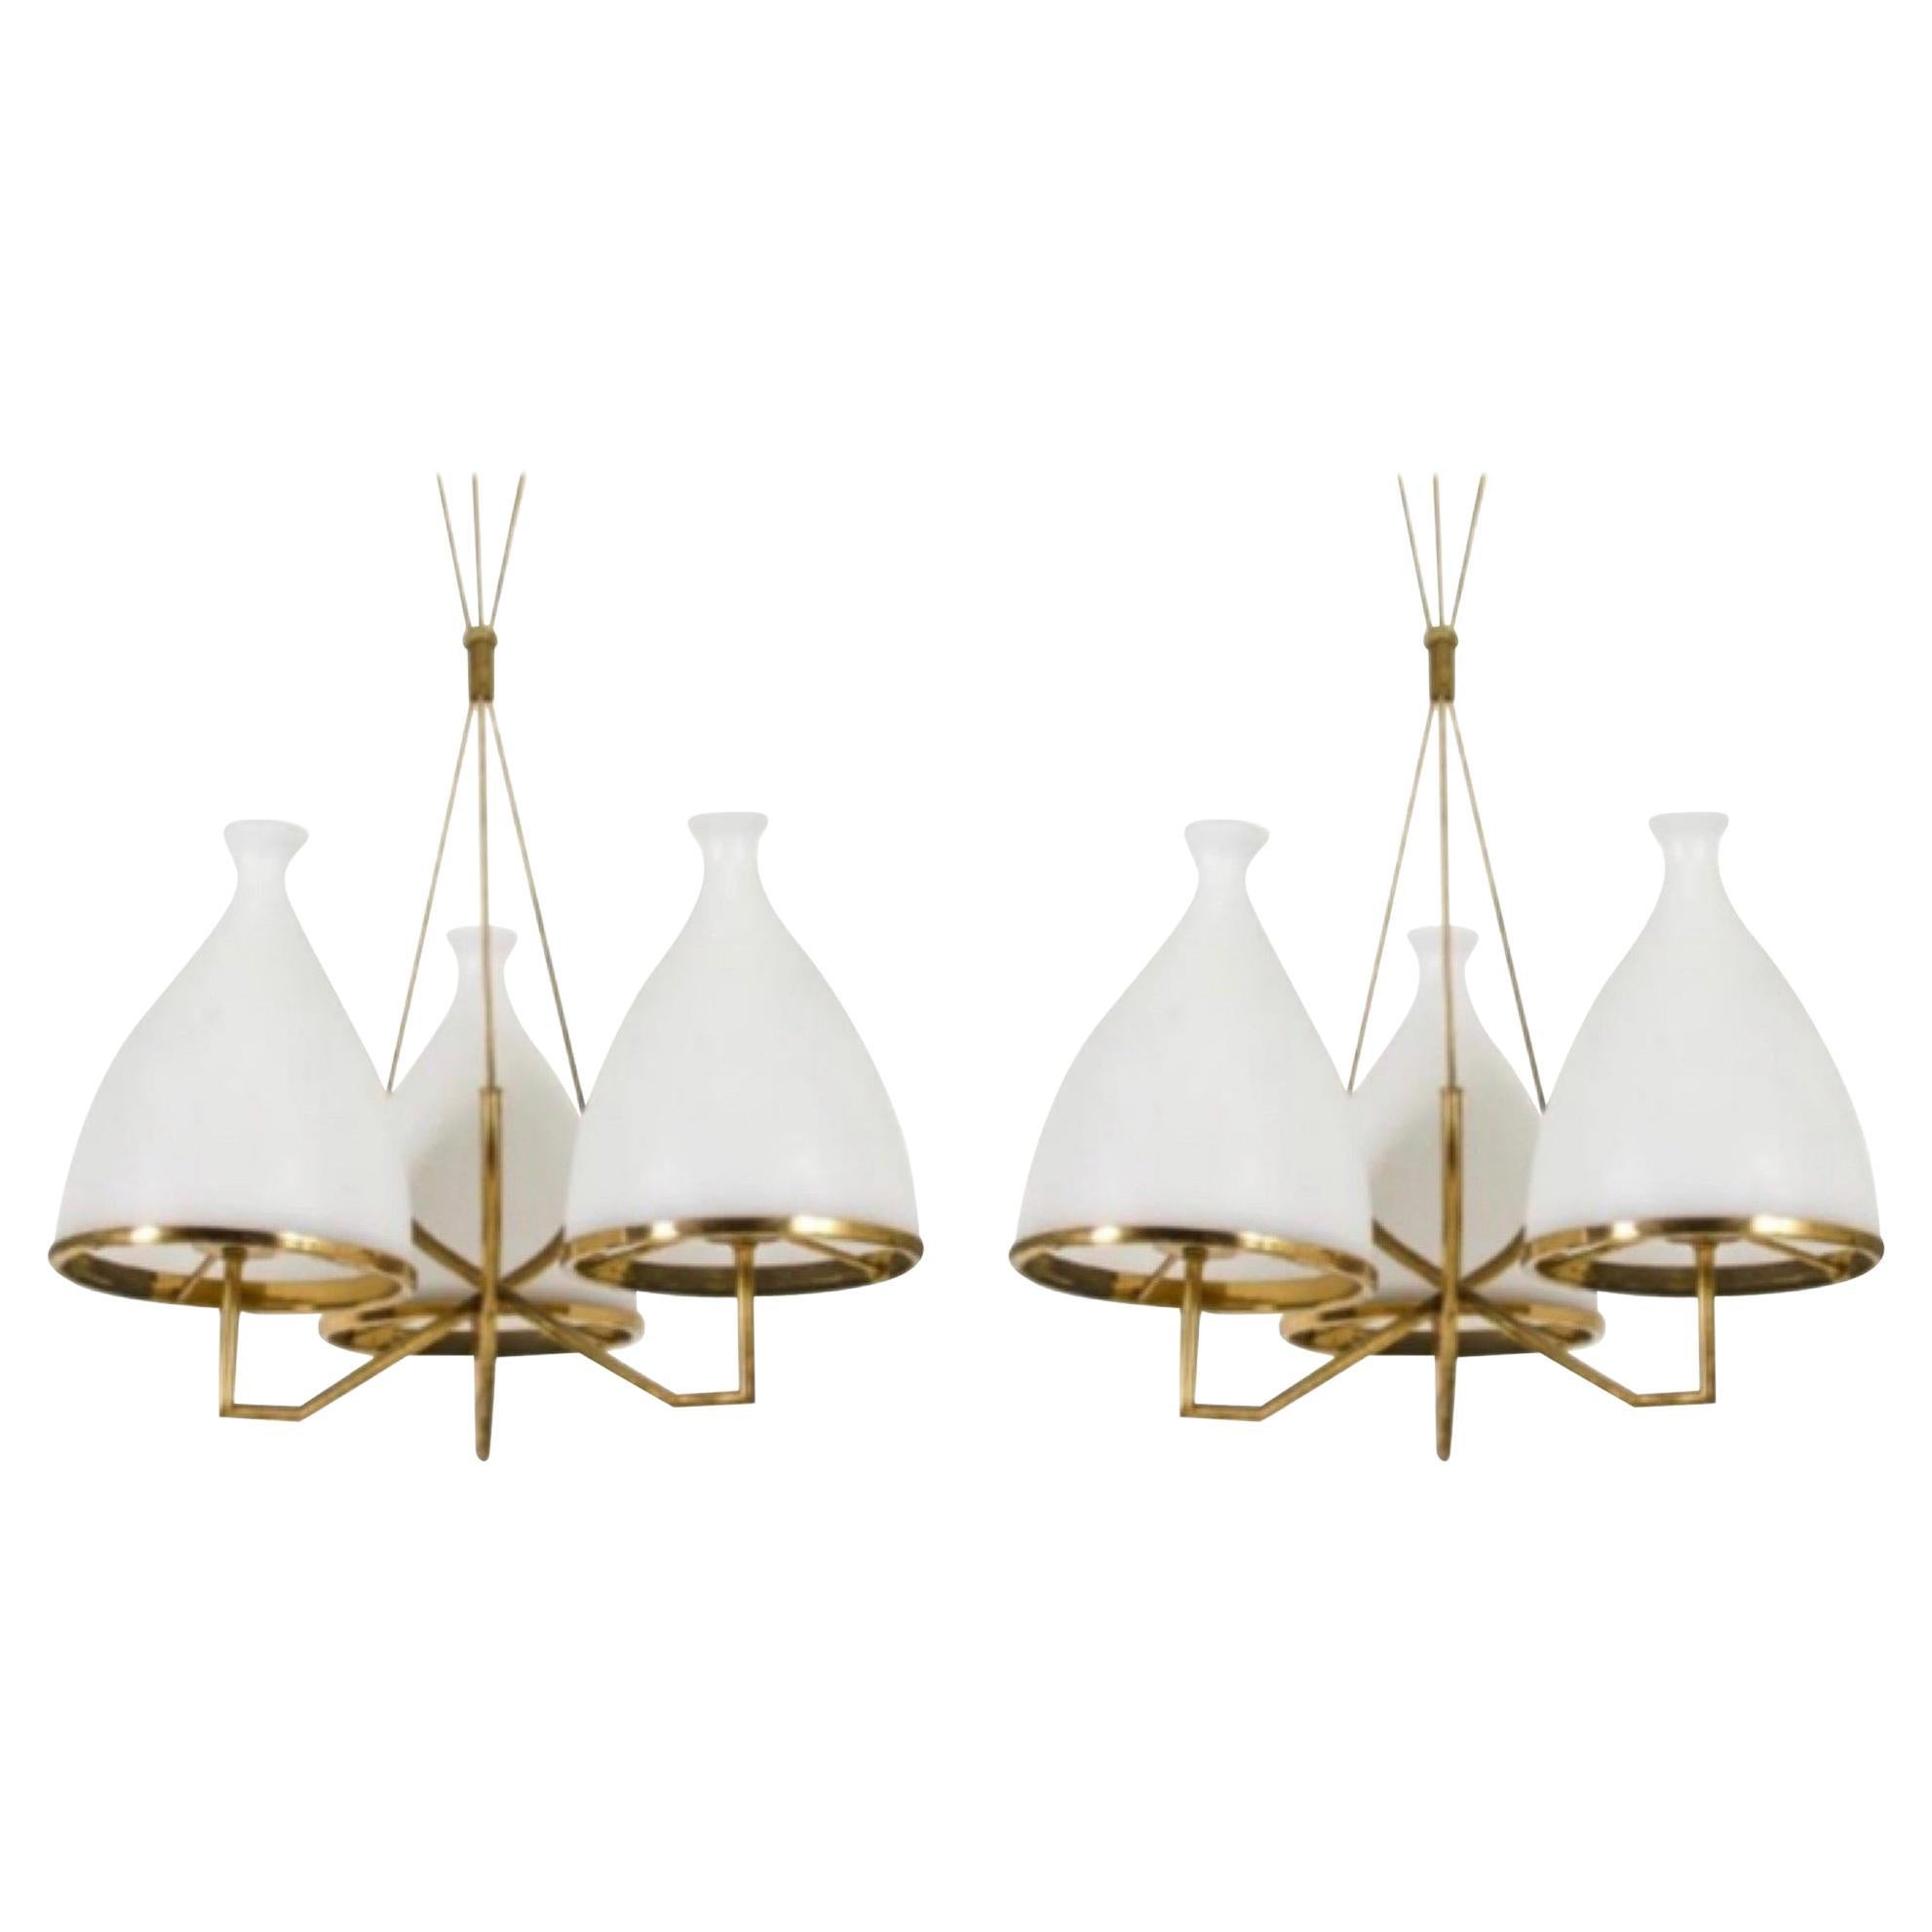 Set of Two Stilnovo Attributed Brass and White Glass Chandeliers, circa 1958